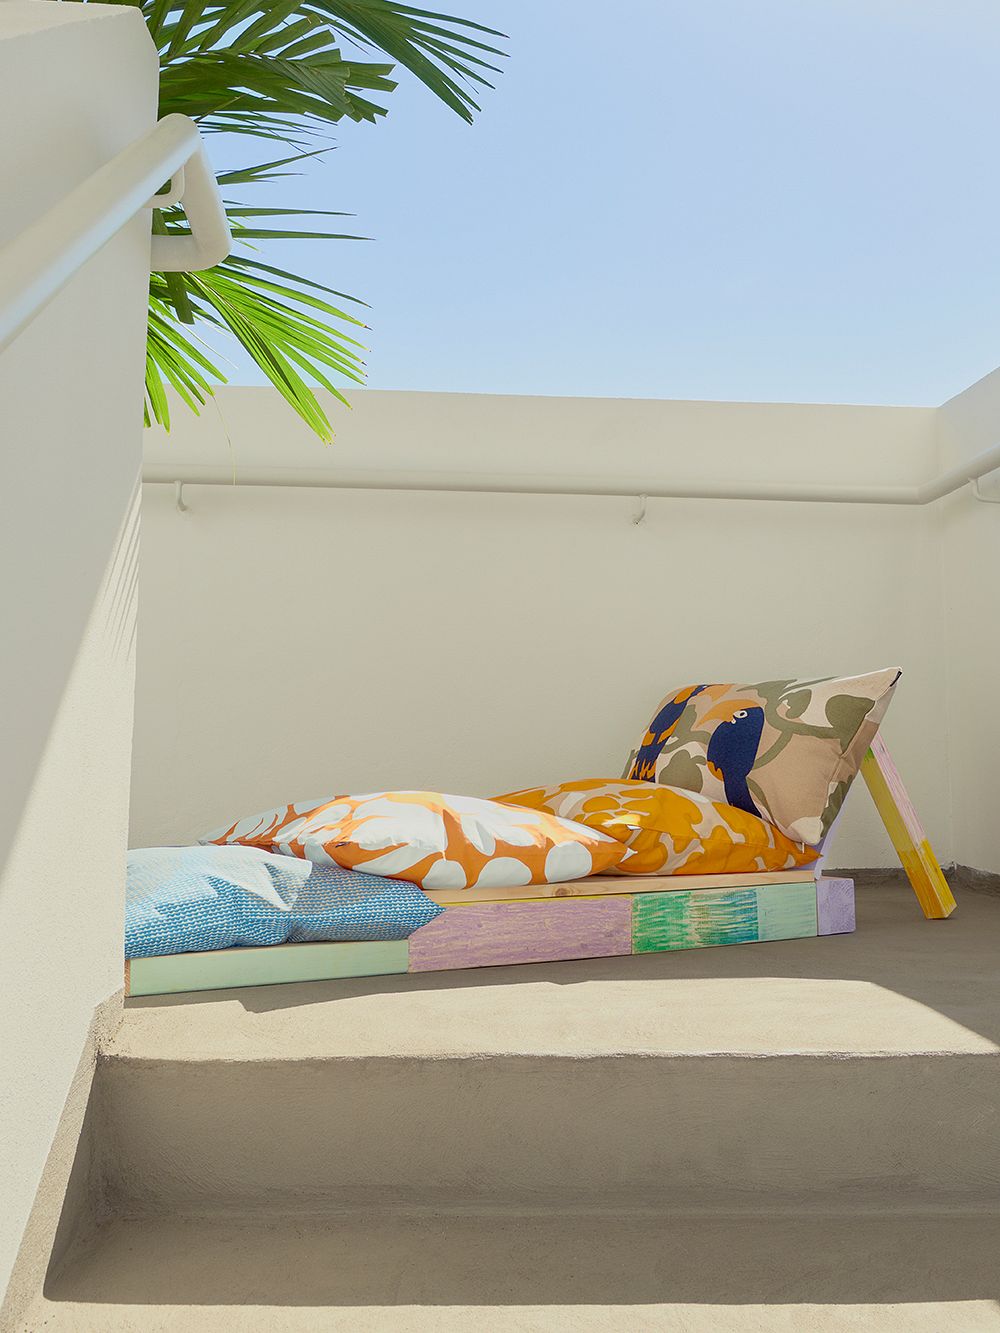 An image of a daybed on a sun-drenched terrace, filled with Marimekko's cushion covers placed.